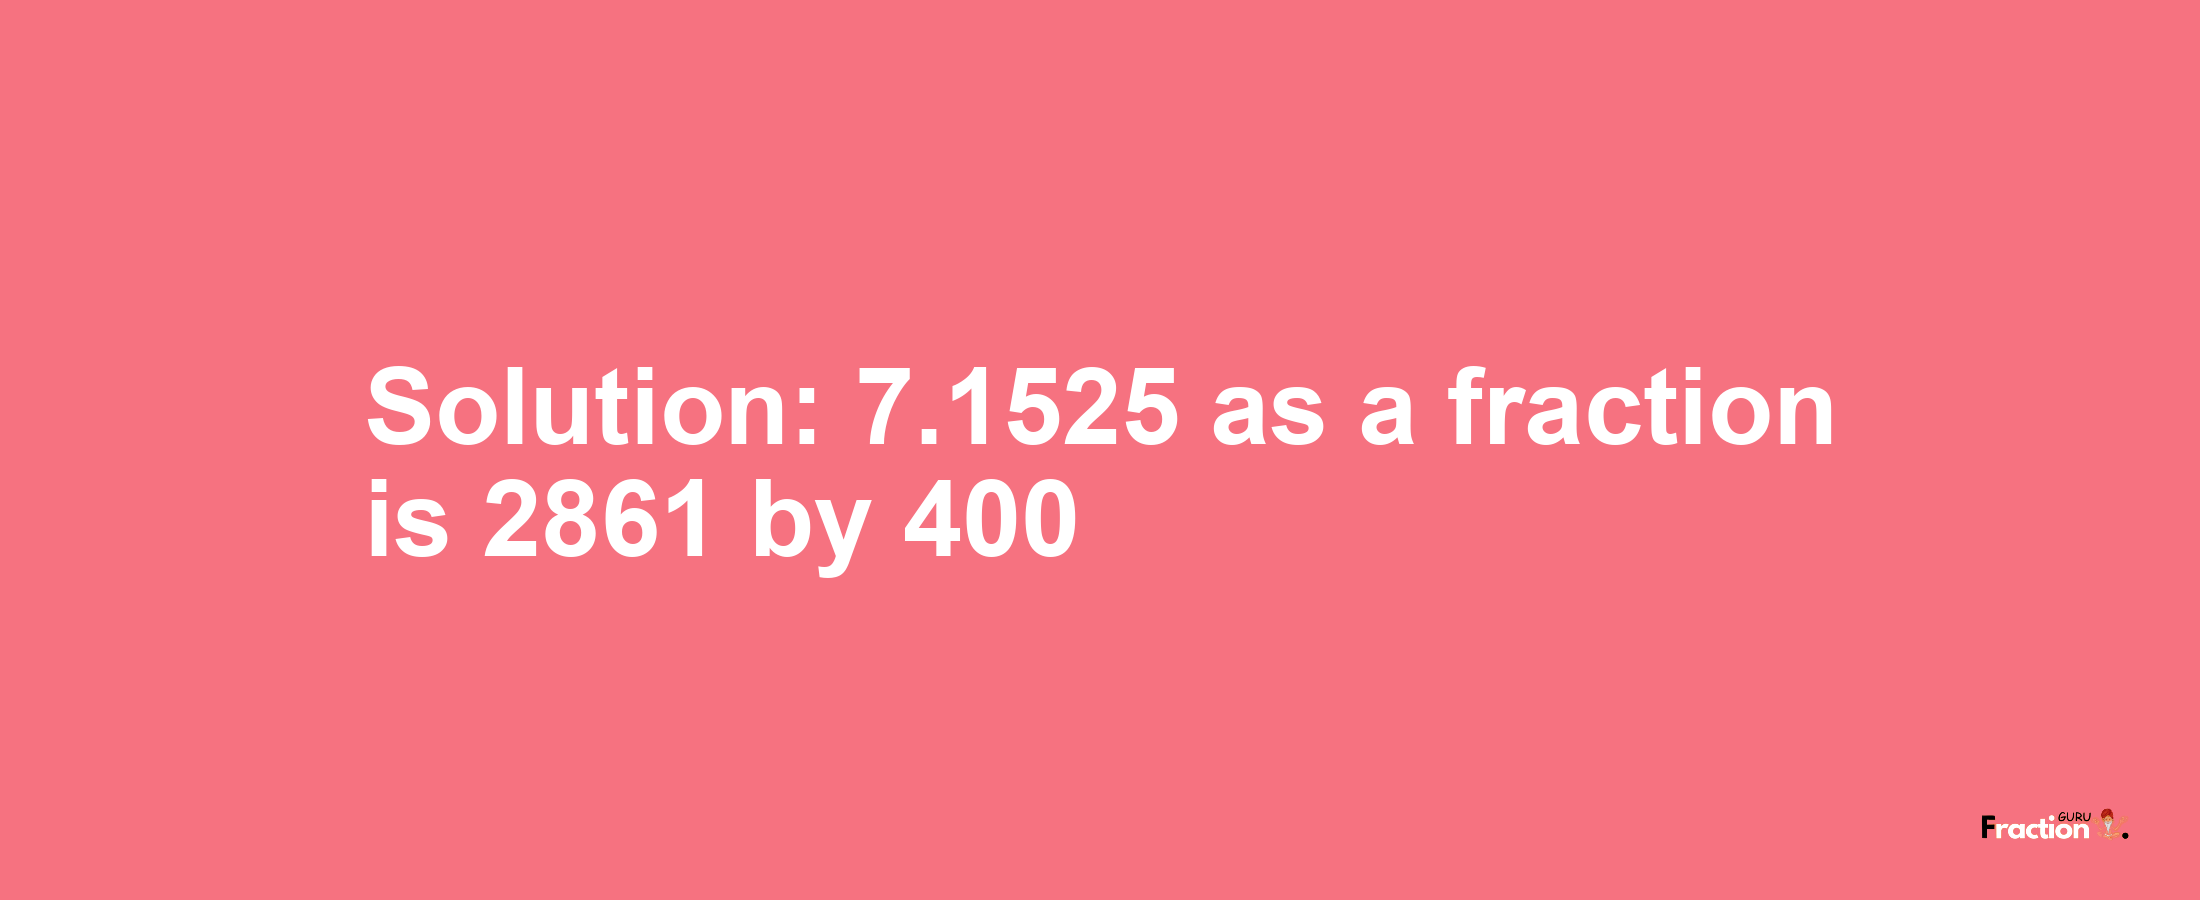 Solution:7.1525 as a fraction is 2861/400